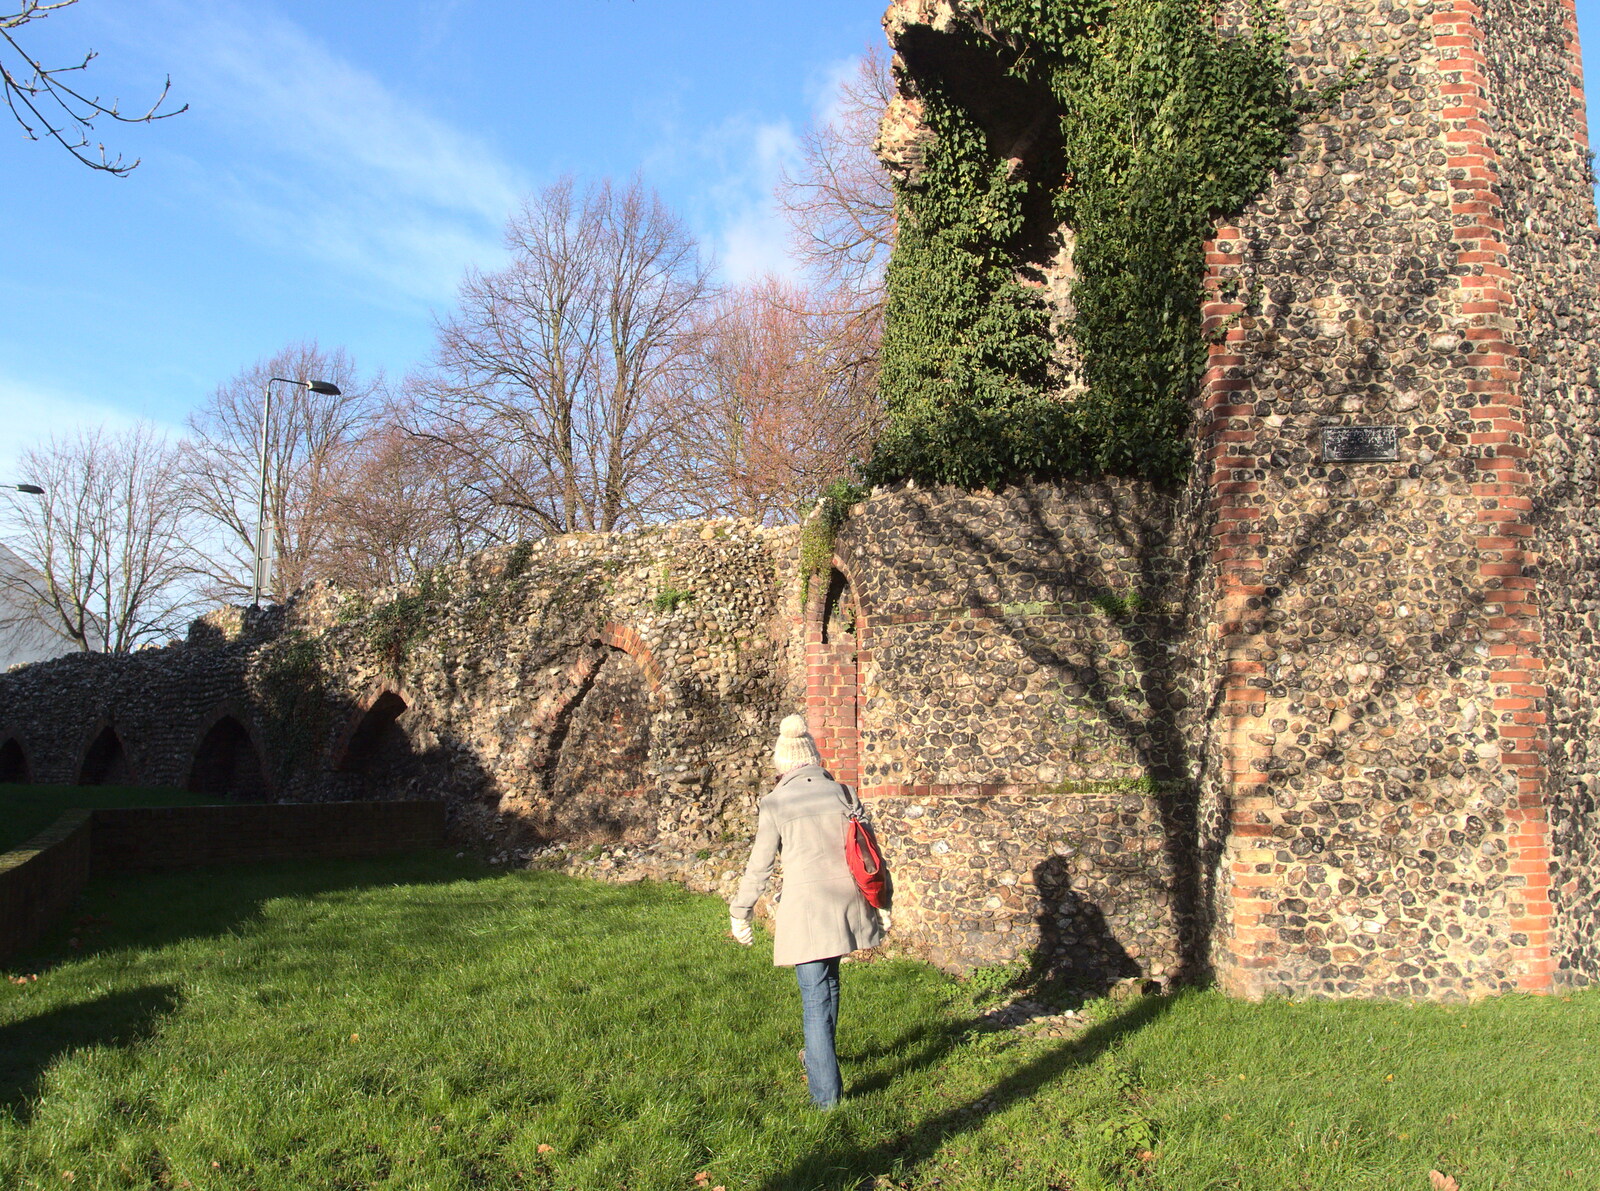 Isobel on the Roman Wall near Barrack Street from The Eye Christmas Lights, and a Trip to Norwich, Norfolk - 4th December 2015